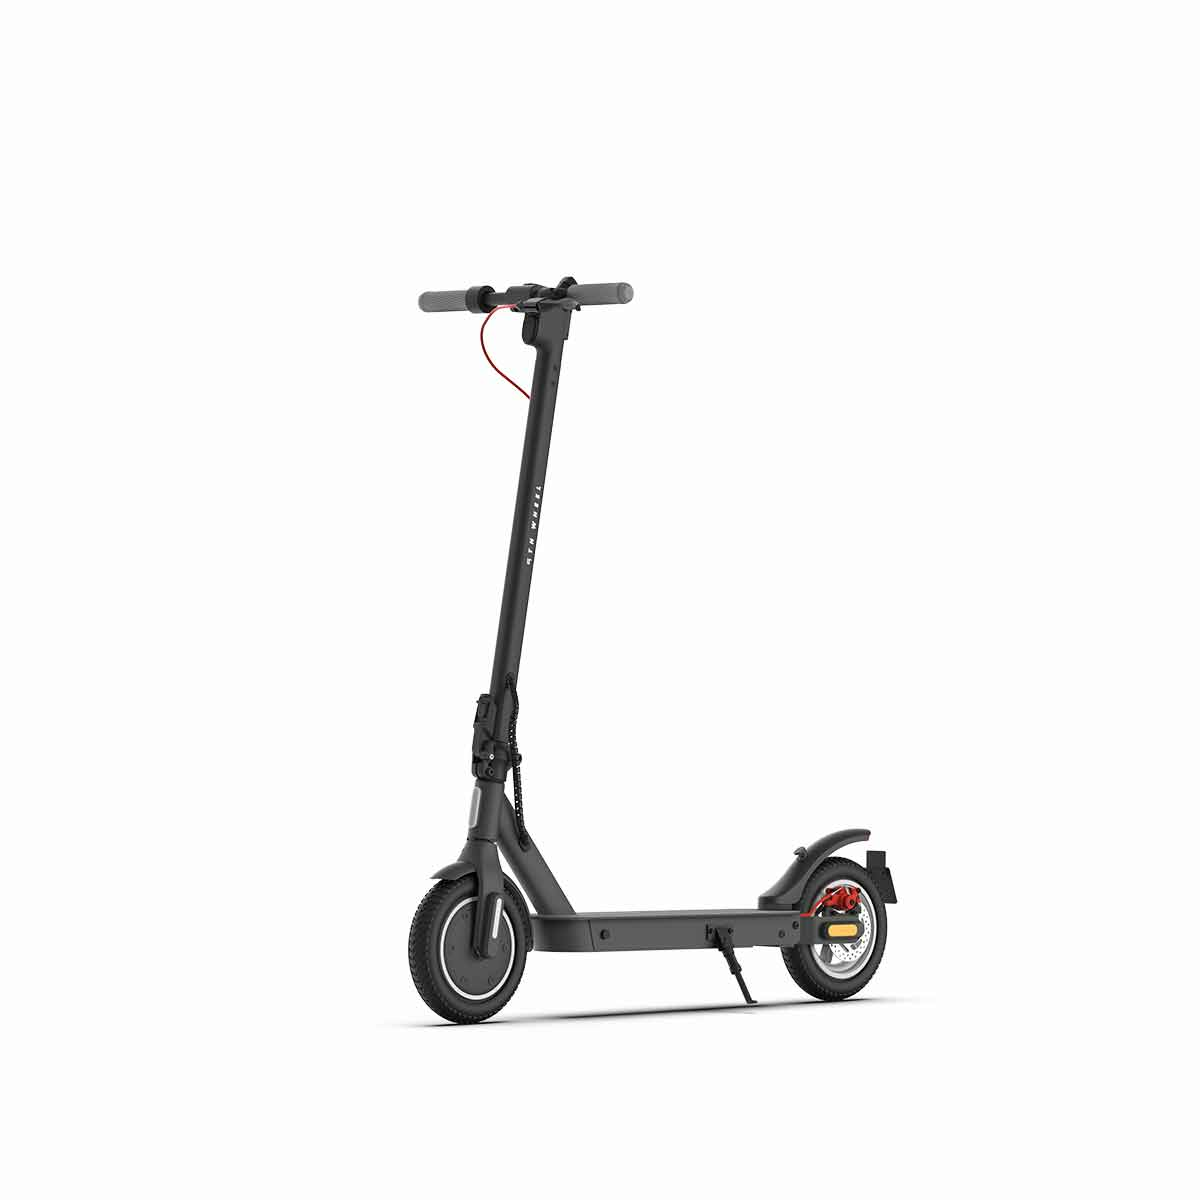 best price,5th,wheel,v30proes09,36v,7.5ah,350w,10,inch,electric,scooter,eu,coupon,price,discount